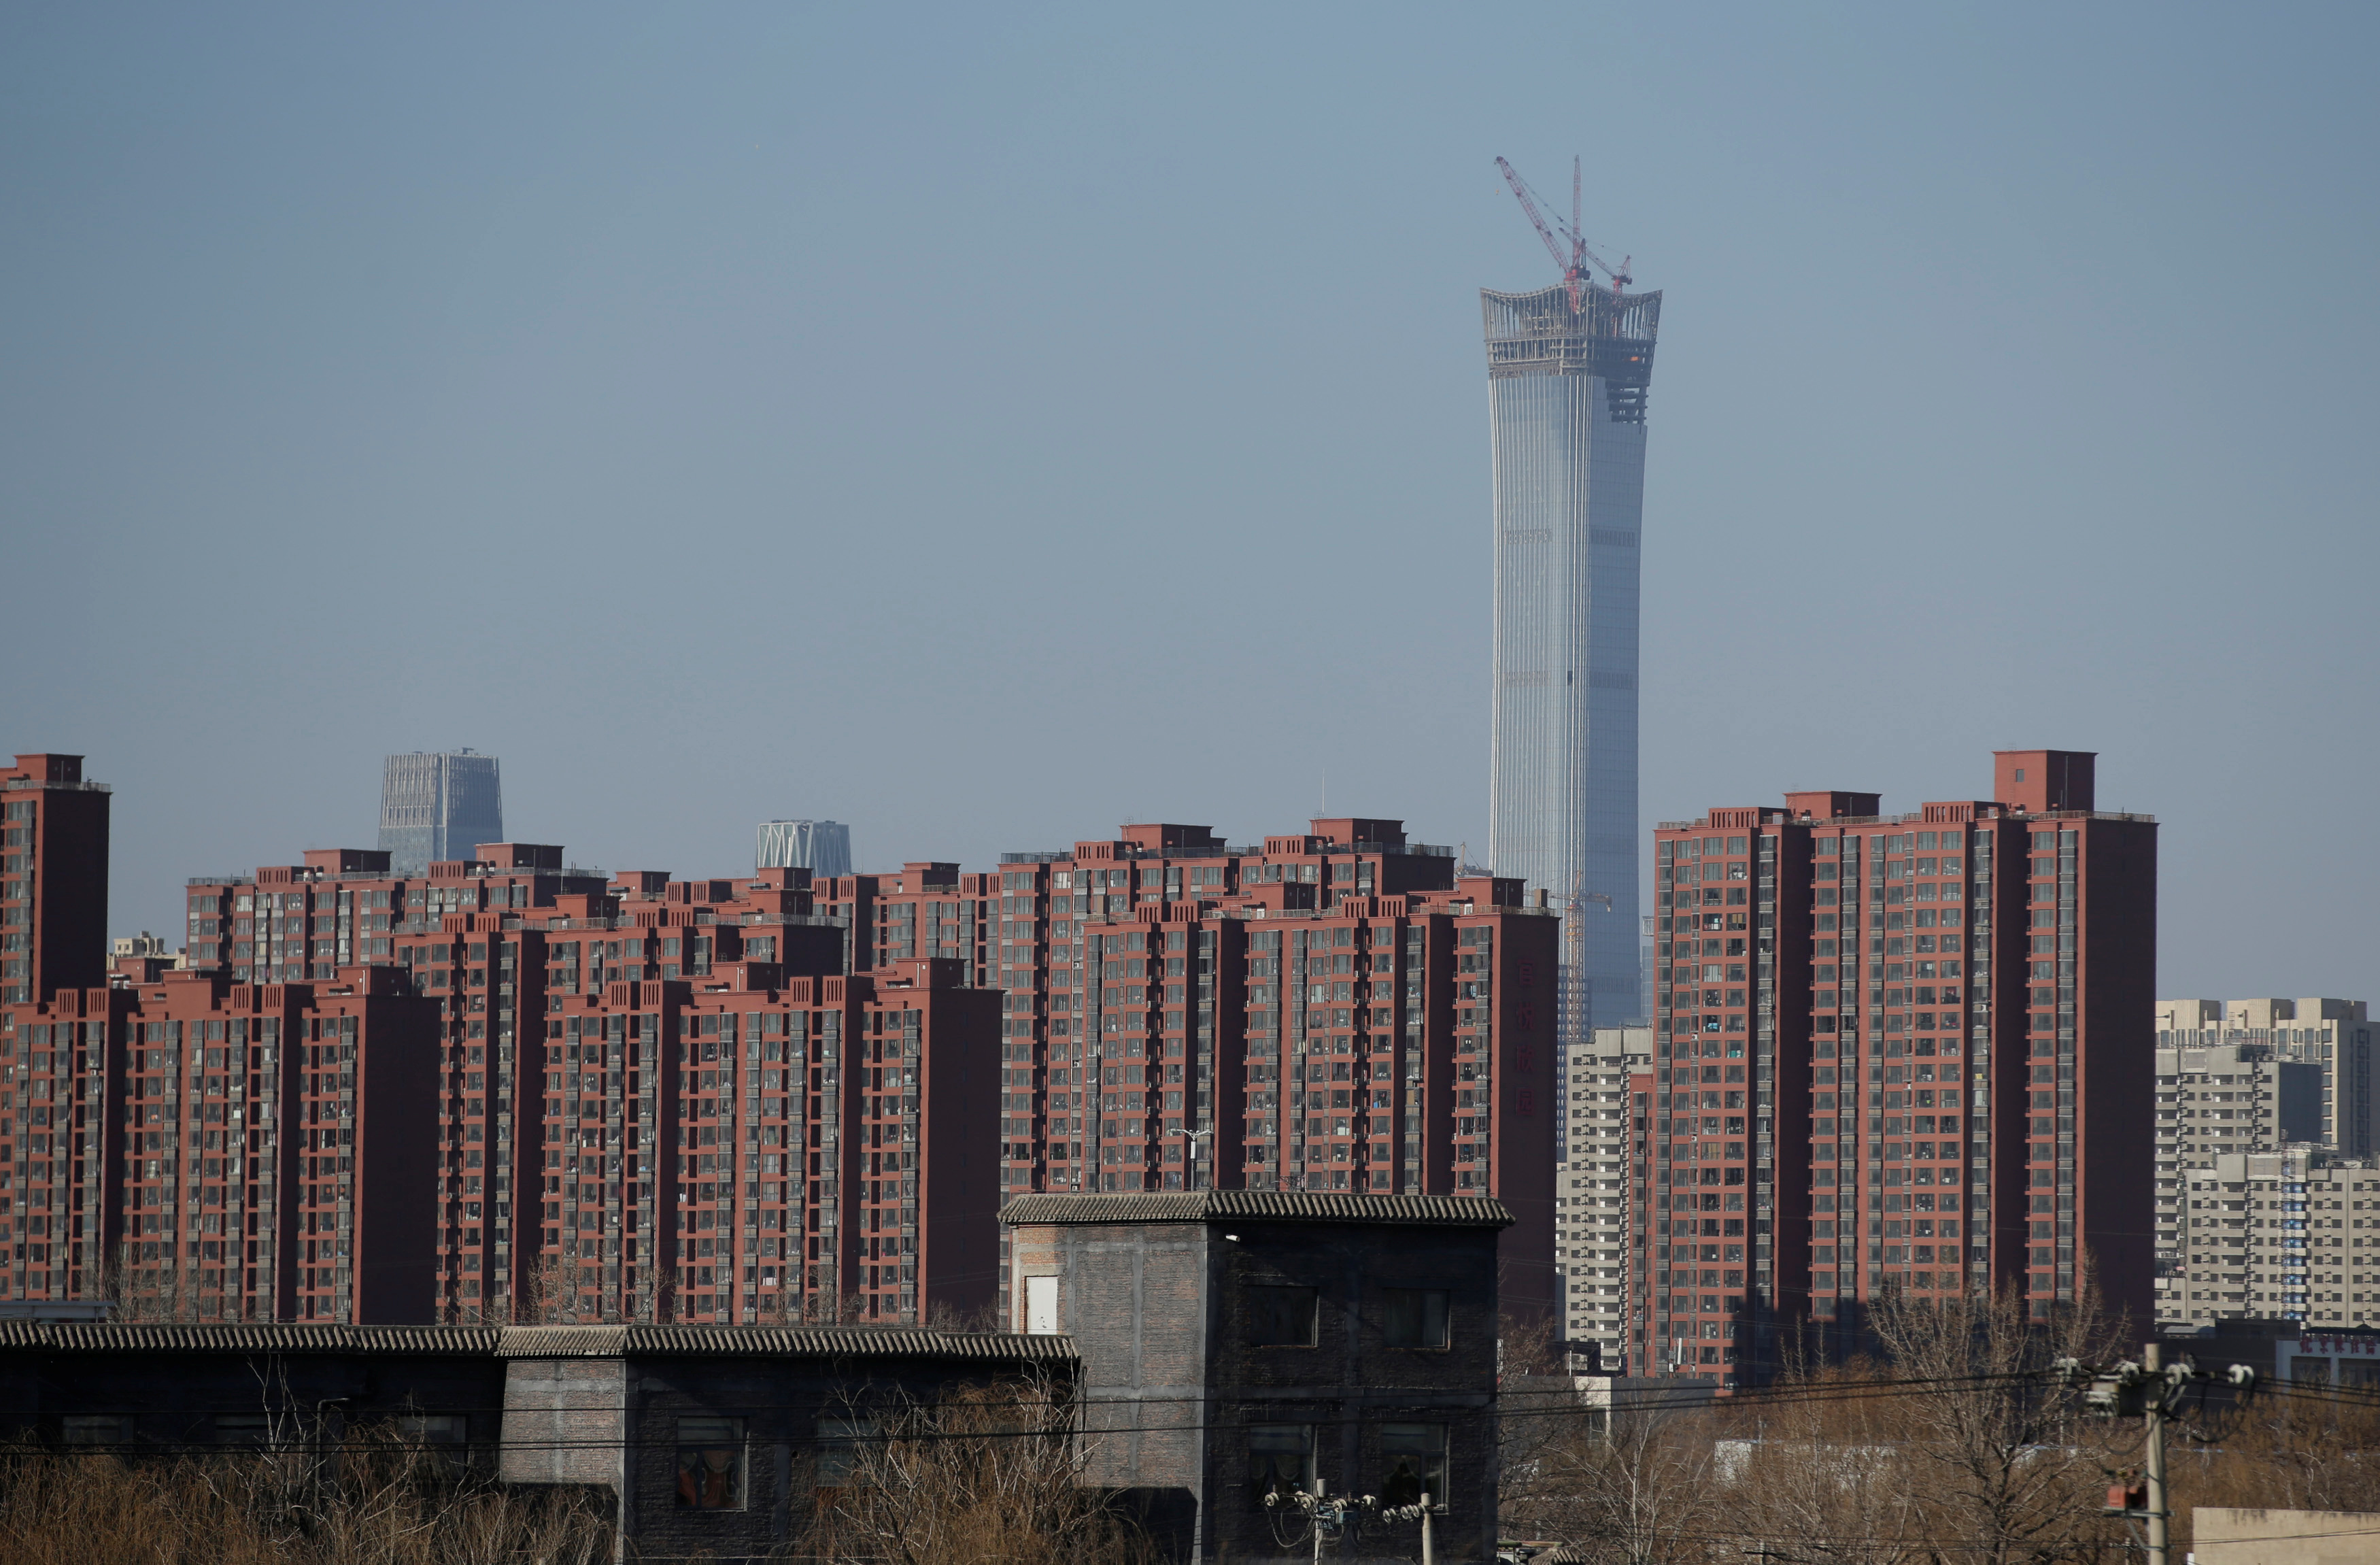 Apartment blocks are pictured in Beijing